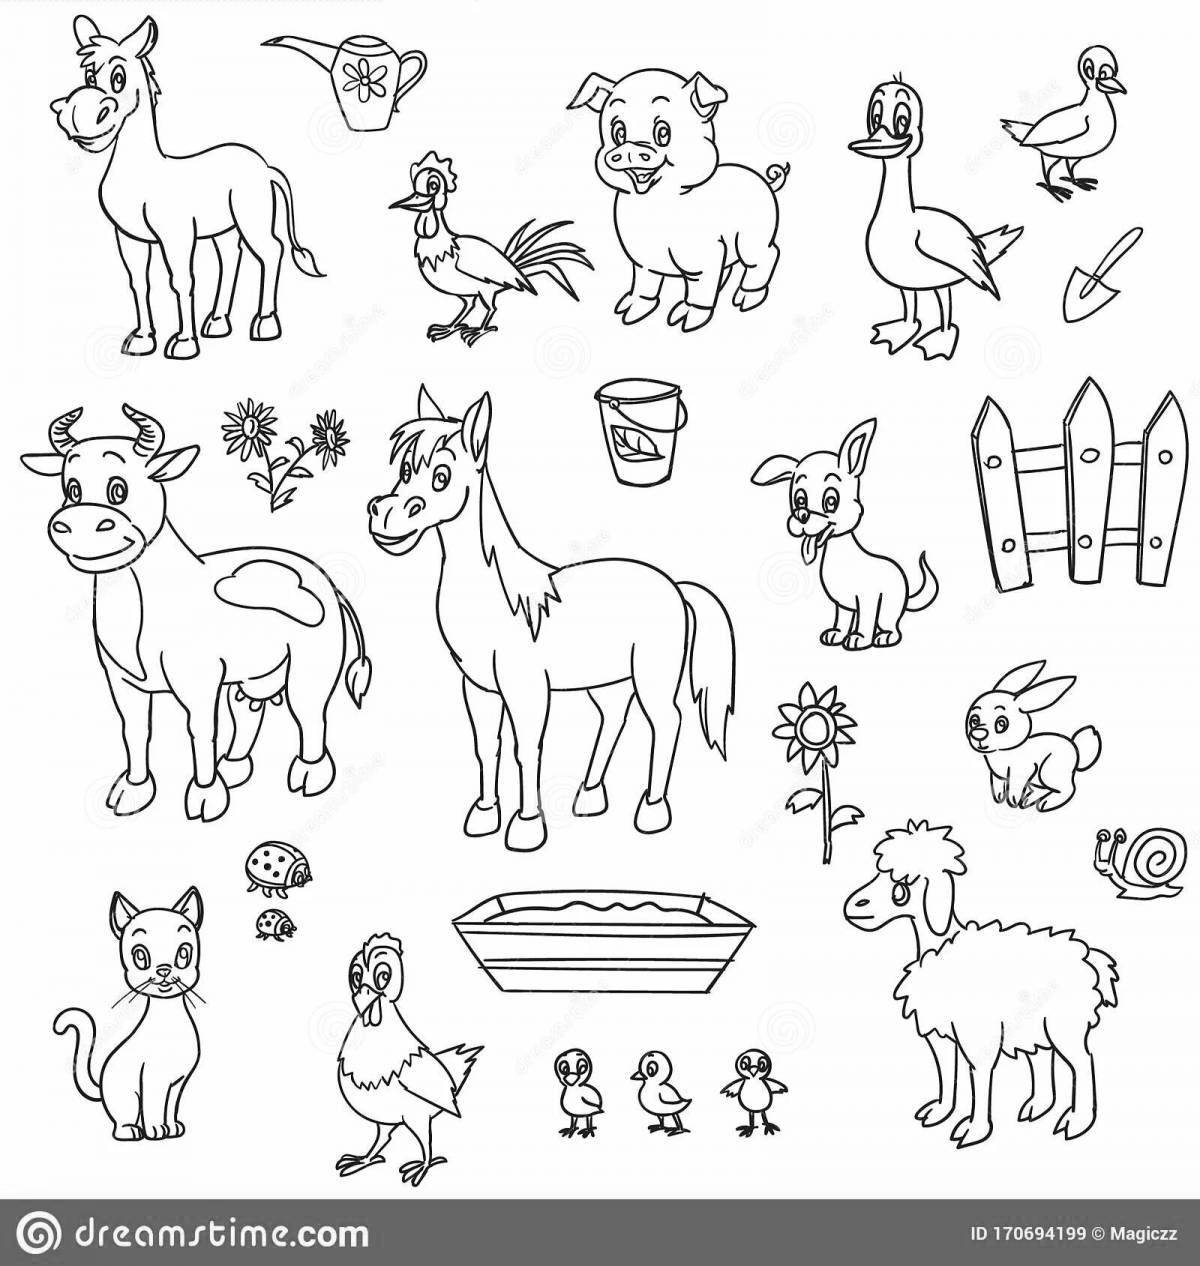 Great animal coloring pages with clothes